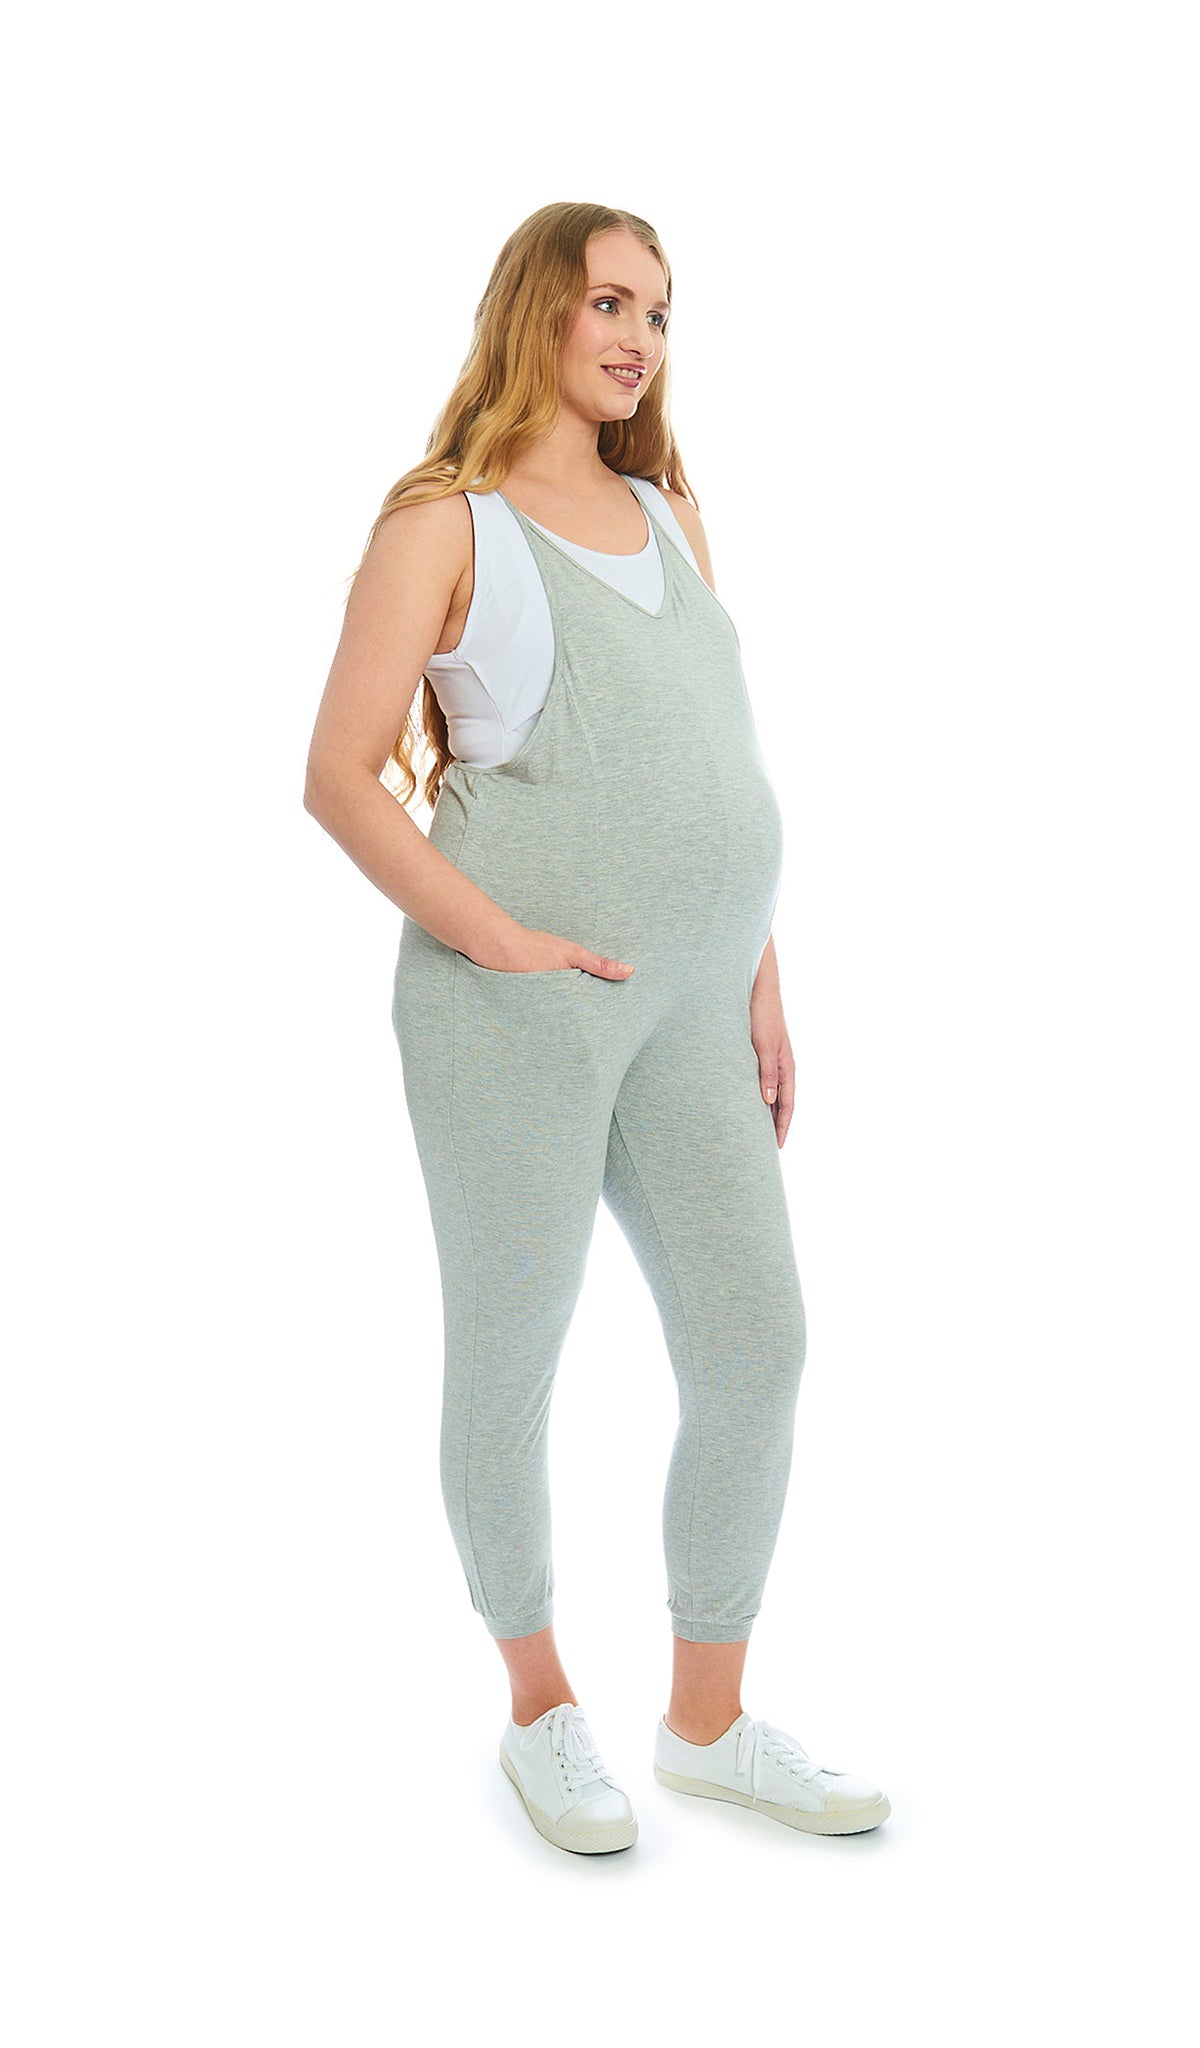 Heather Grey Solid Brandi Romper. Pregnant woman wearing Brandi romper over white Kara Tank and with tennis shoes.